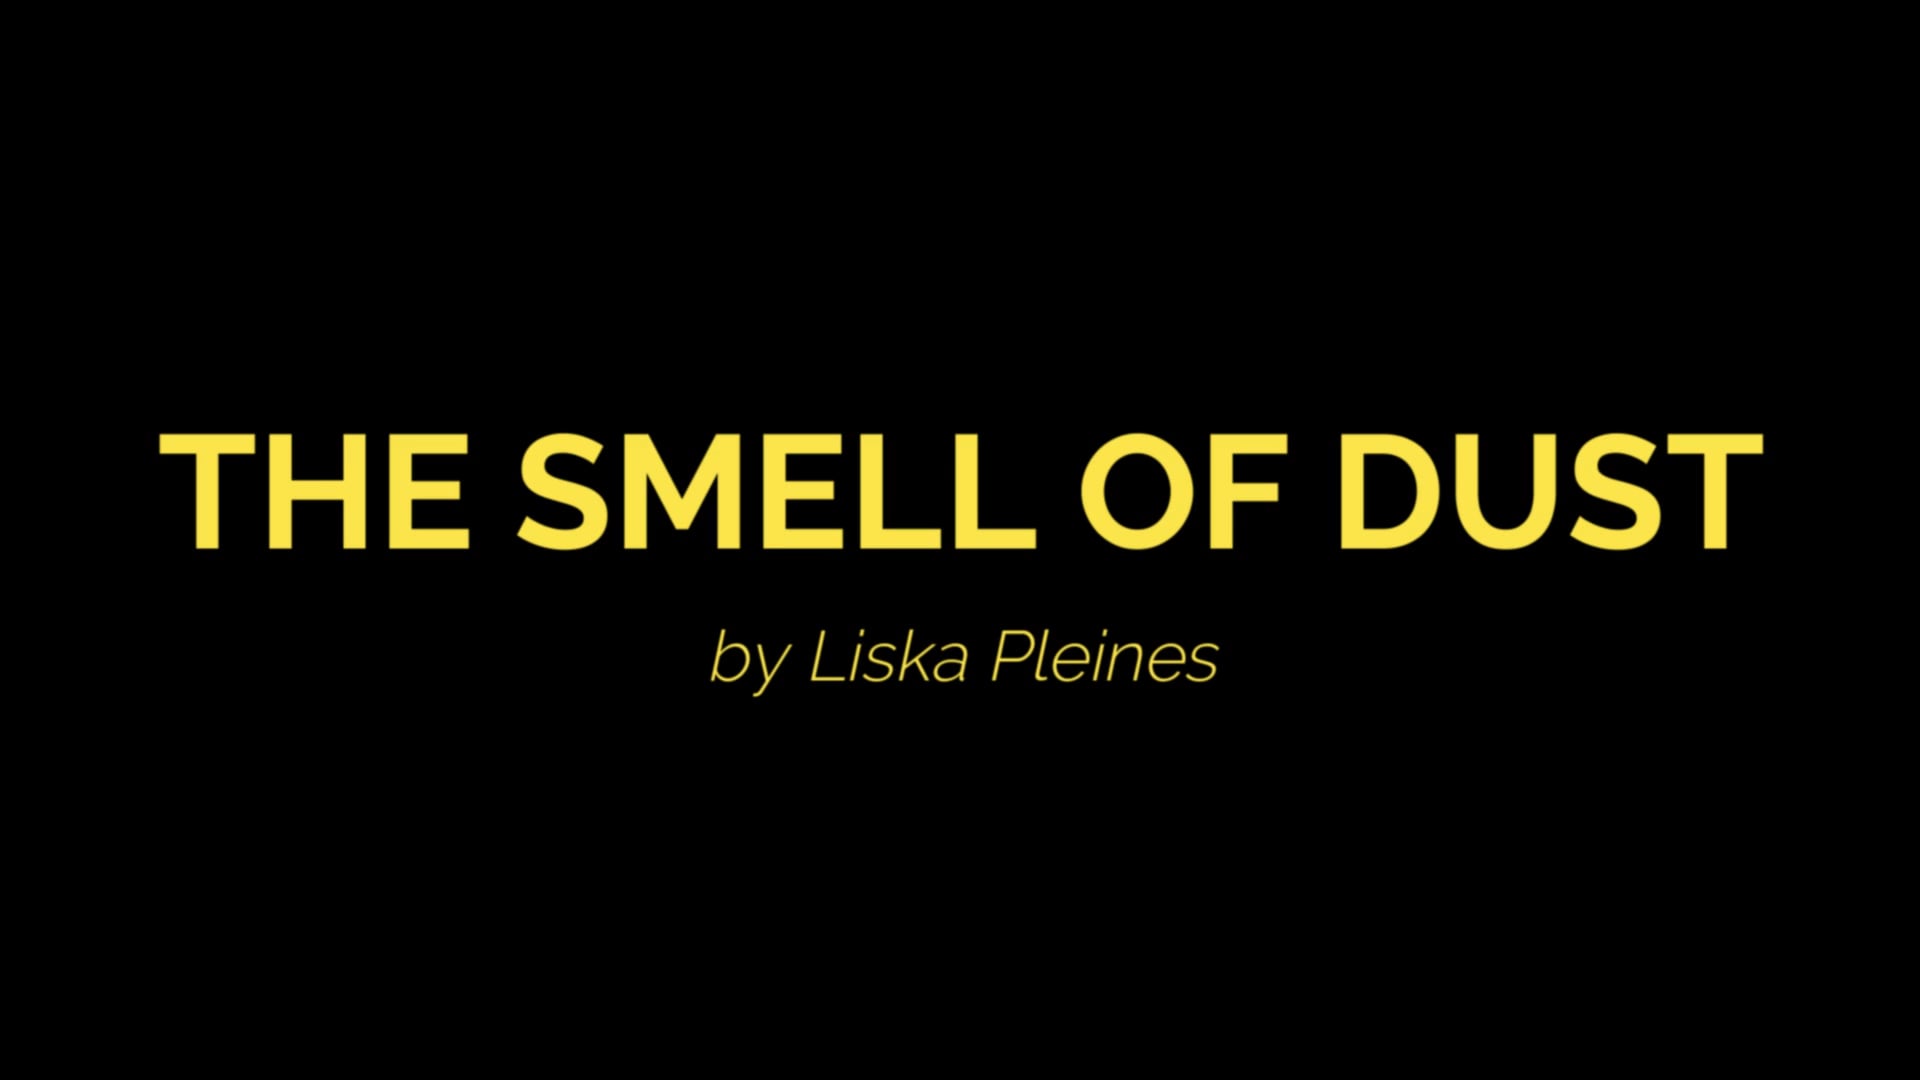 THE SMELL OF DUST